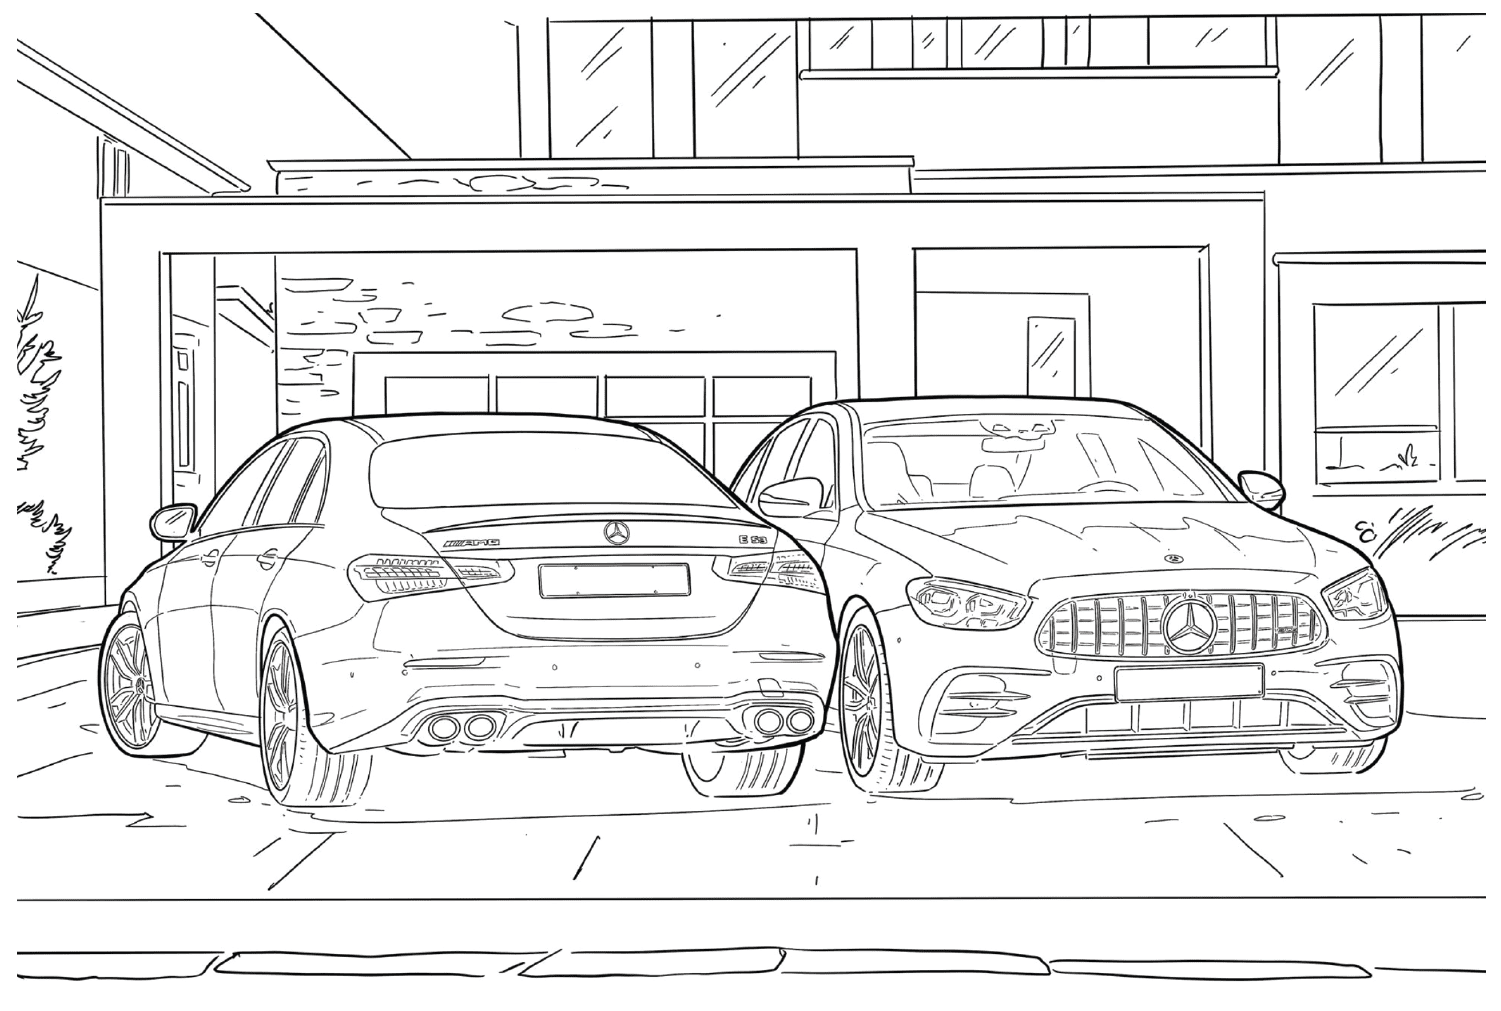 Mercedes-Benz Coloring Pages to for Kids from Mercedes-Benz